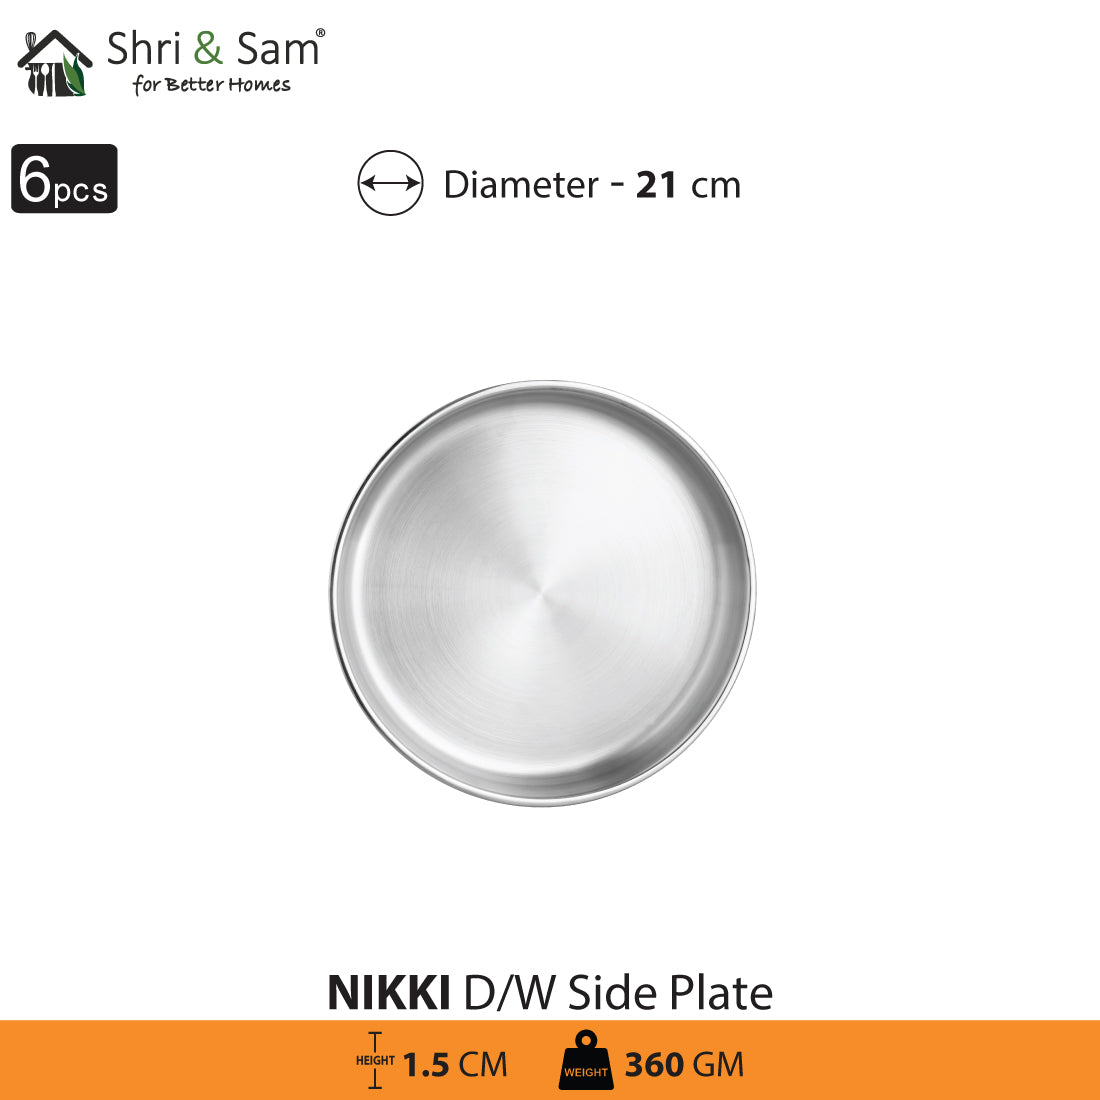 Stainless Steel 6 PCS Double Wall Side Plate Nikki